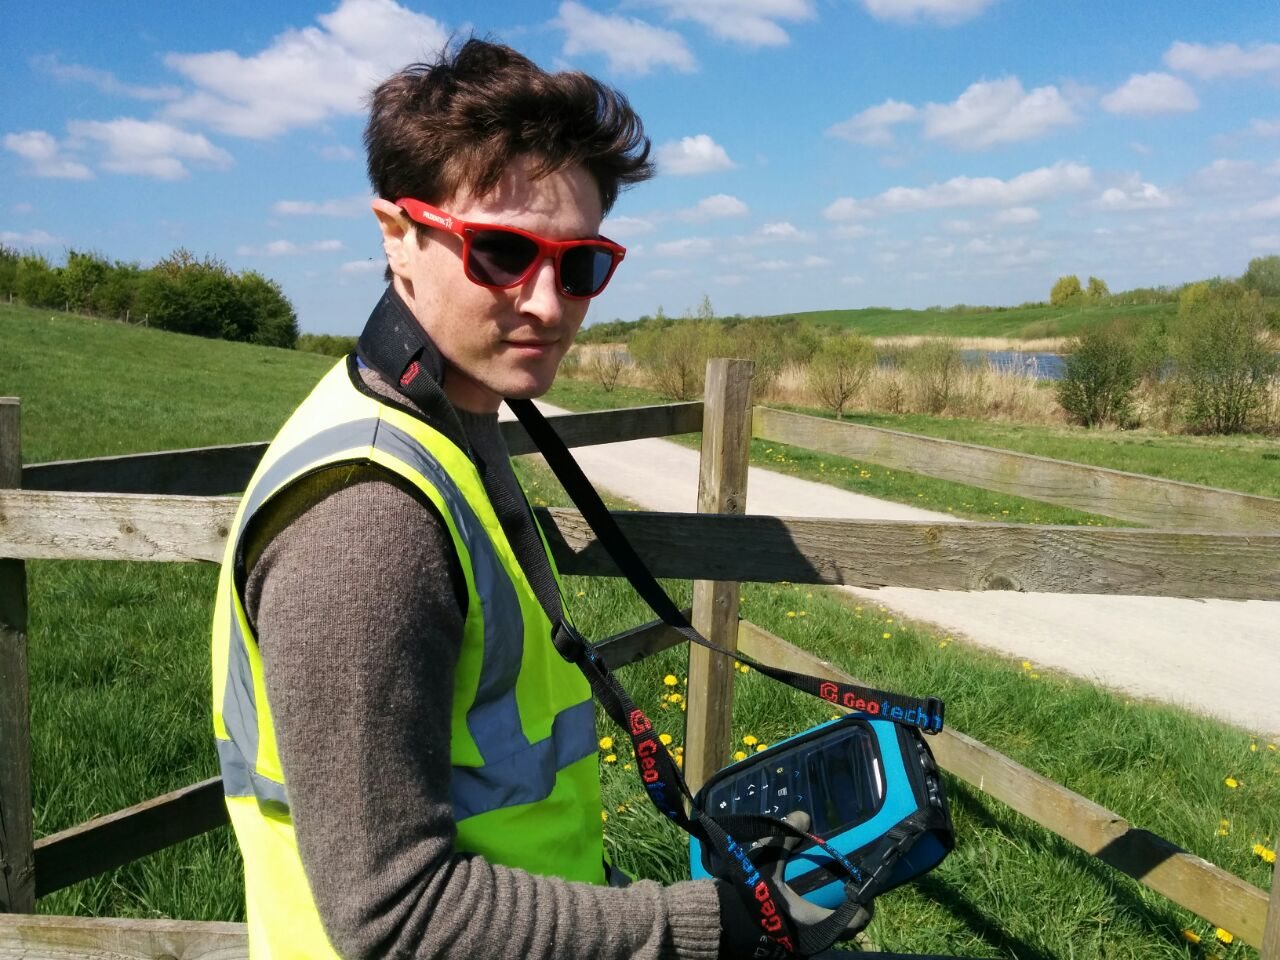 George carrying out landfill gas data collection for the Environment Agency